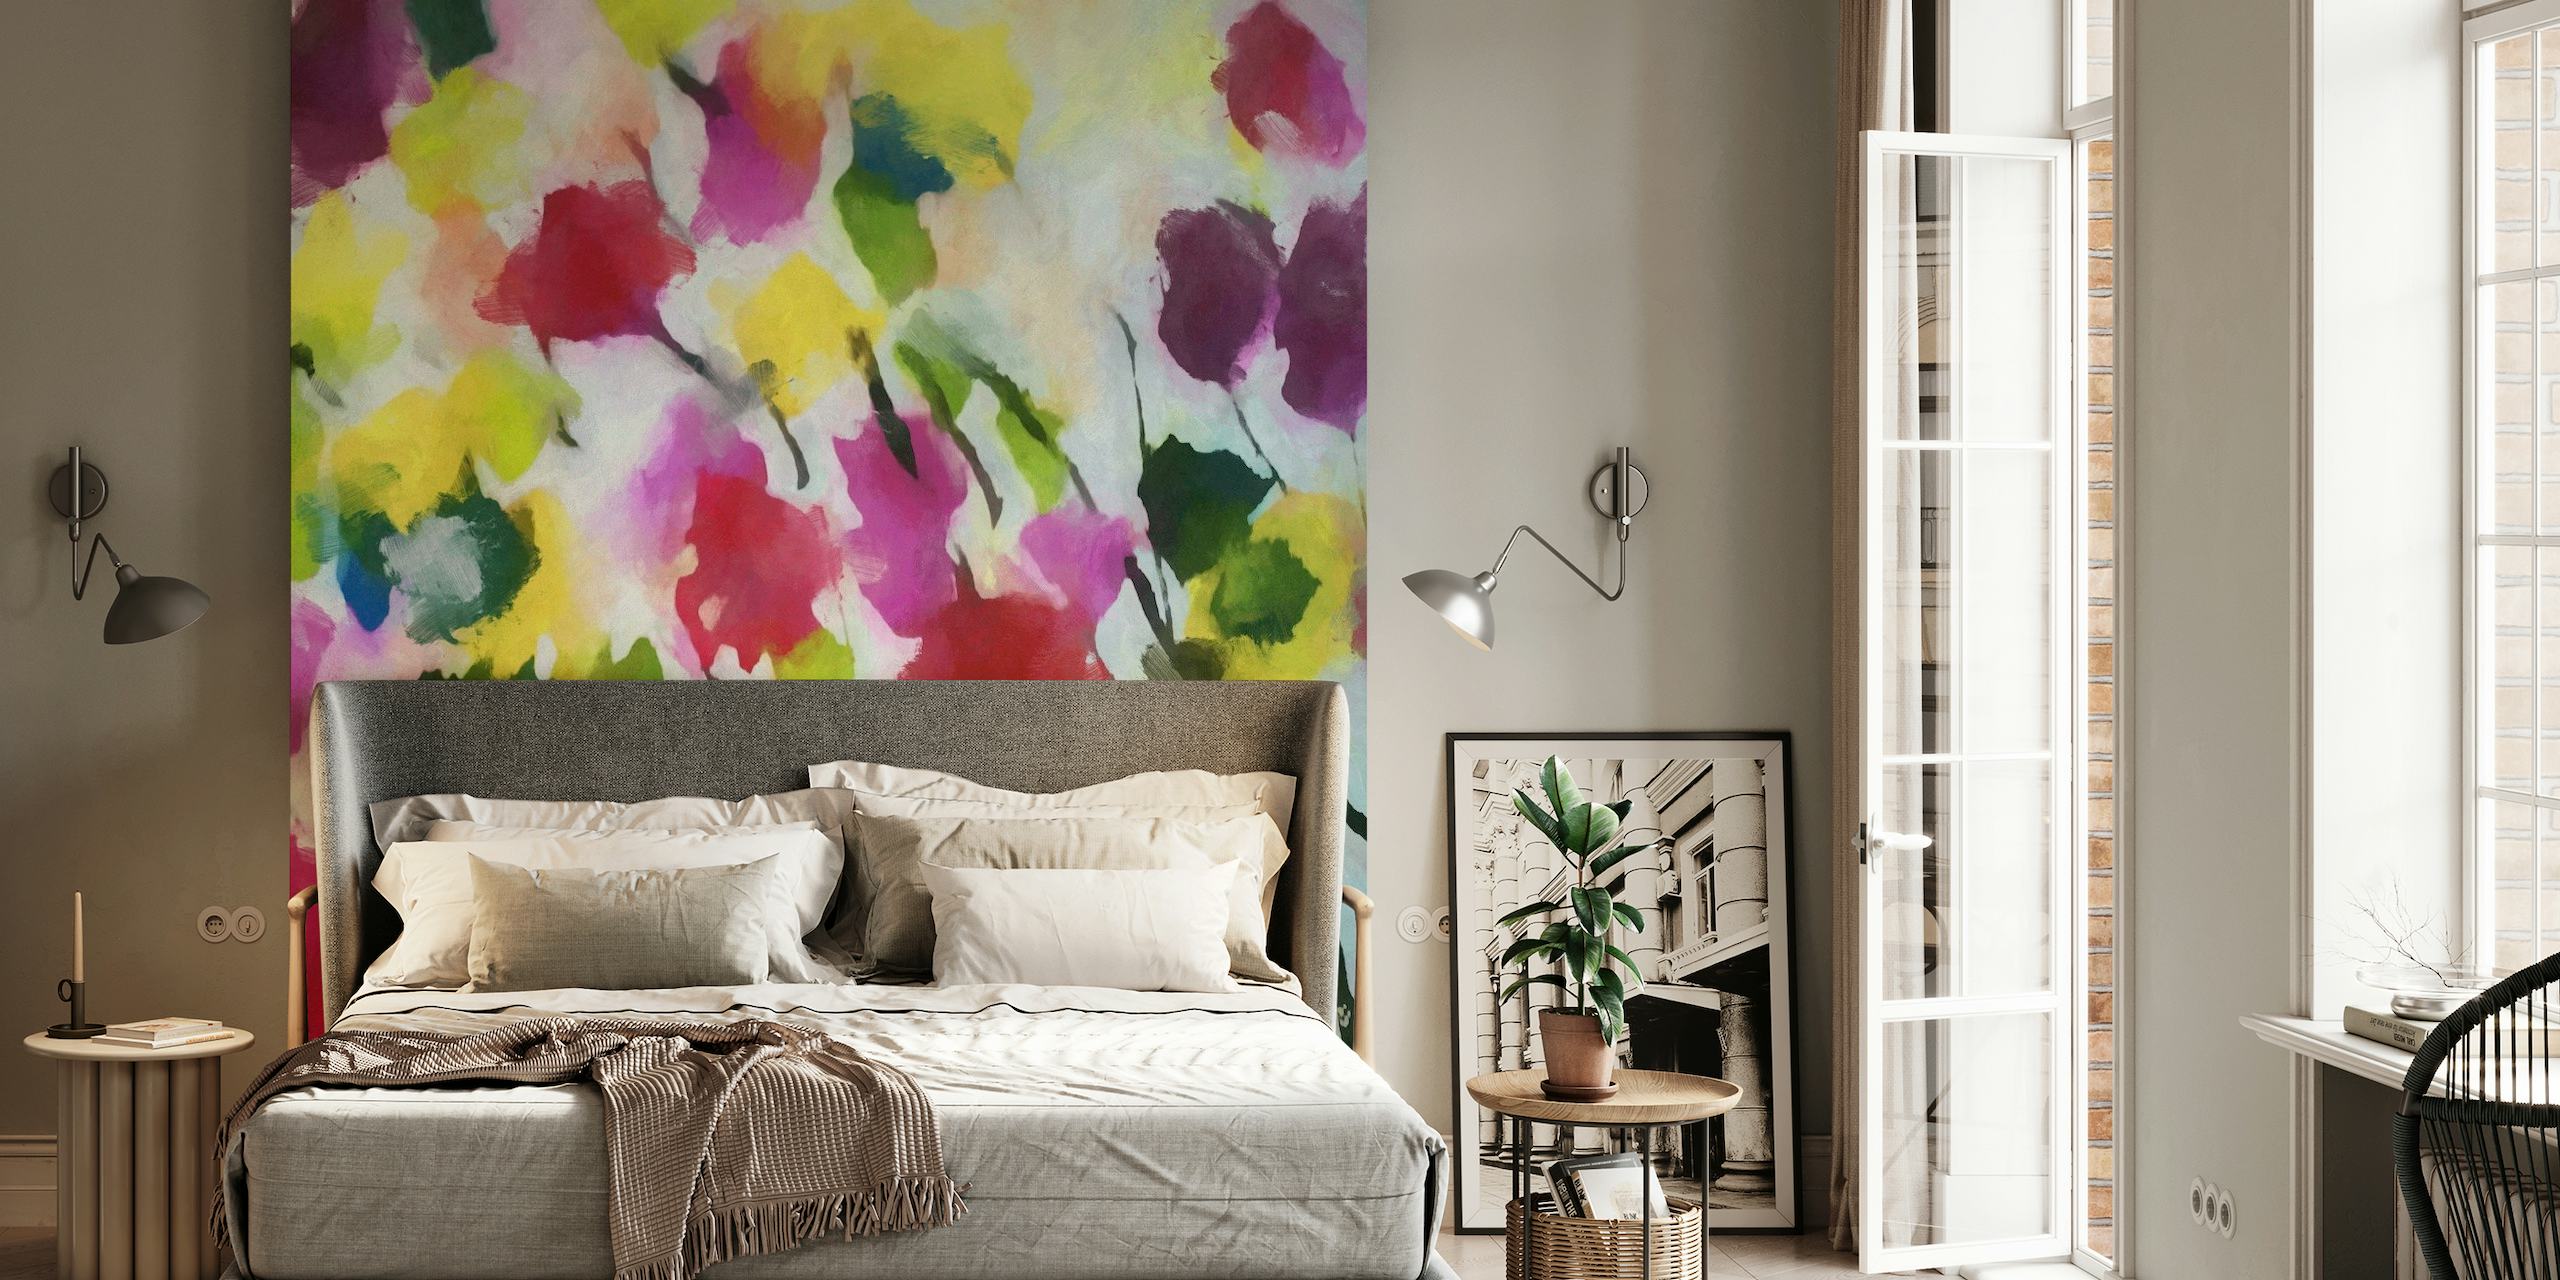 Colorful floral wall mural in watercolor style, featuring pink, yellow, and green blossoms